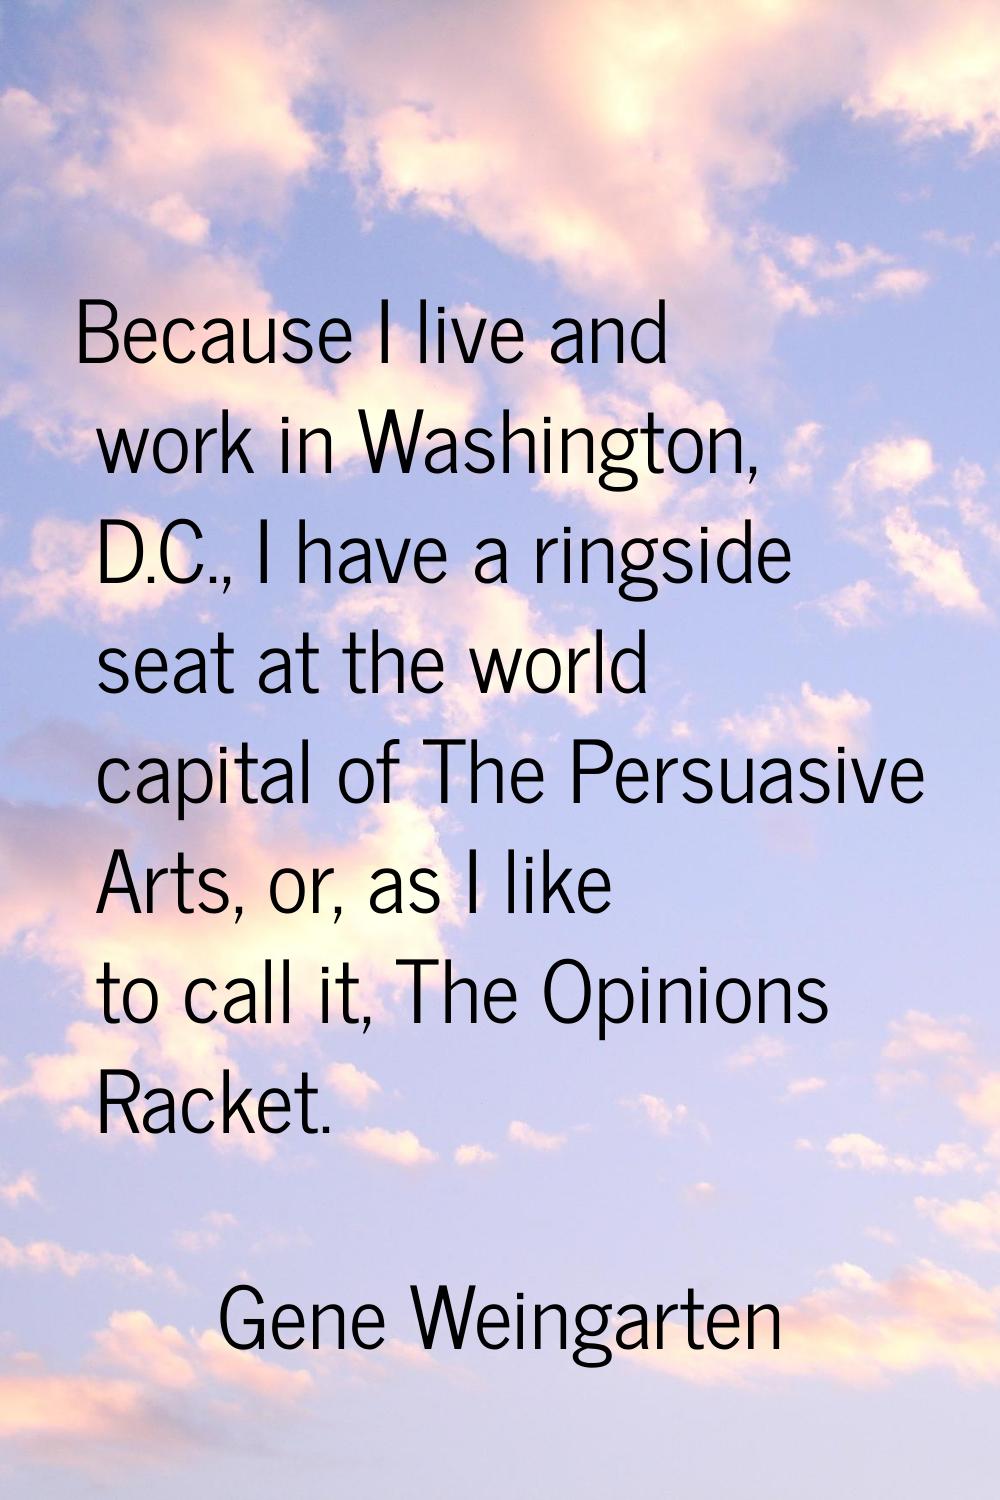 Because I live and work in Washington, D.C., I have a ringside seat at the world capital of The Per